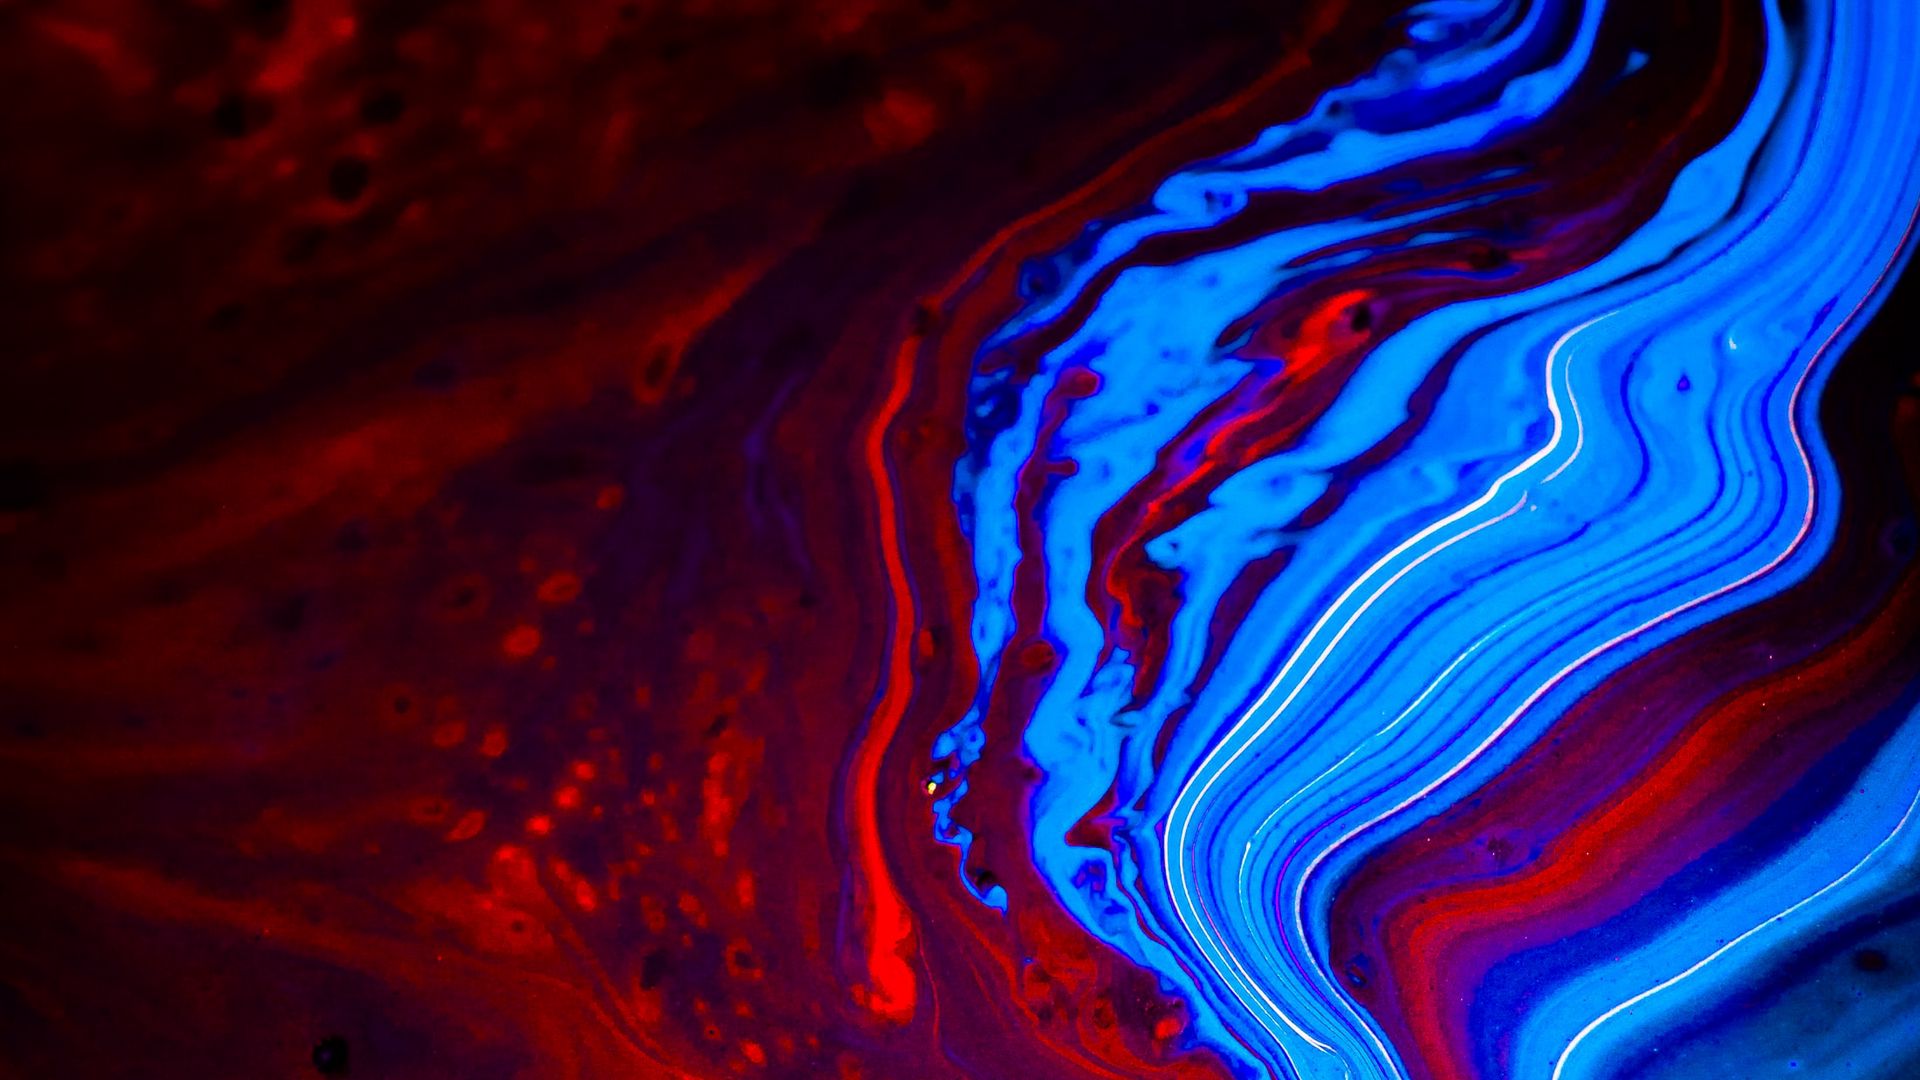 Download wallpaper 1920x1080 paint, liquid, fluid art, stains, distortion, red, blue full hd, hdtv, fhd, 1080p HD background